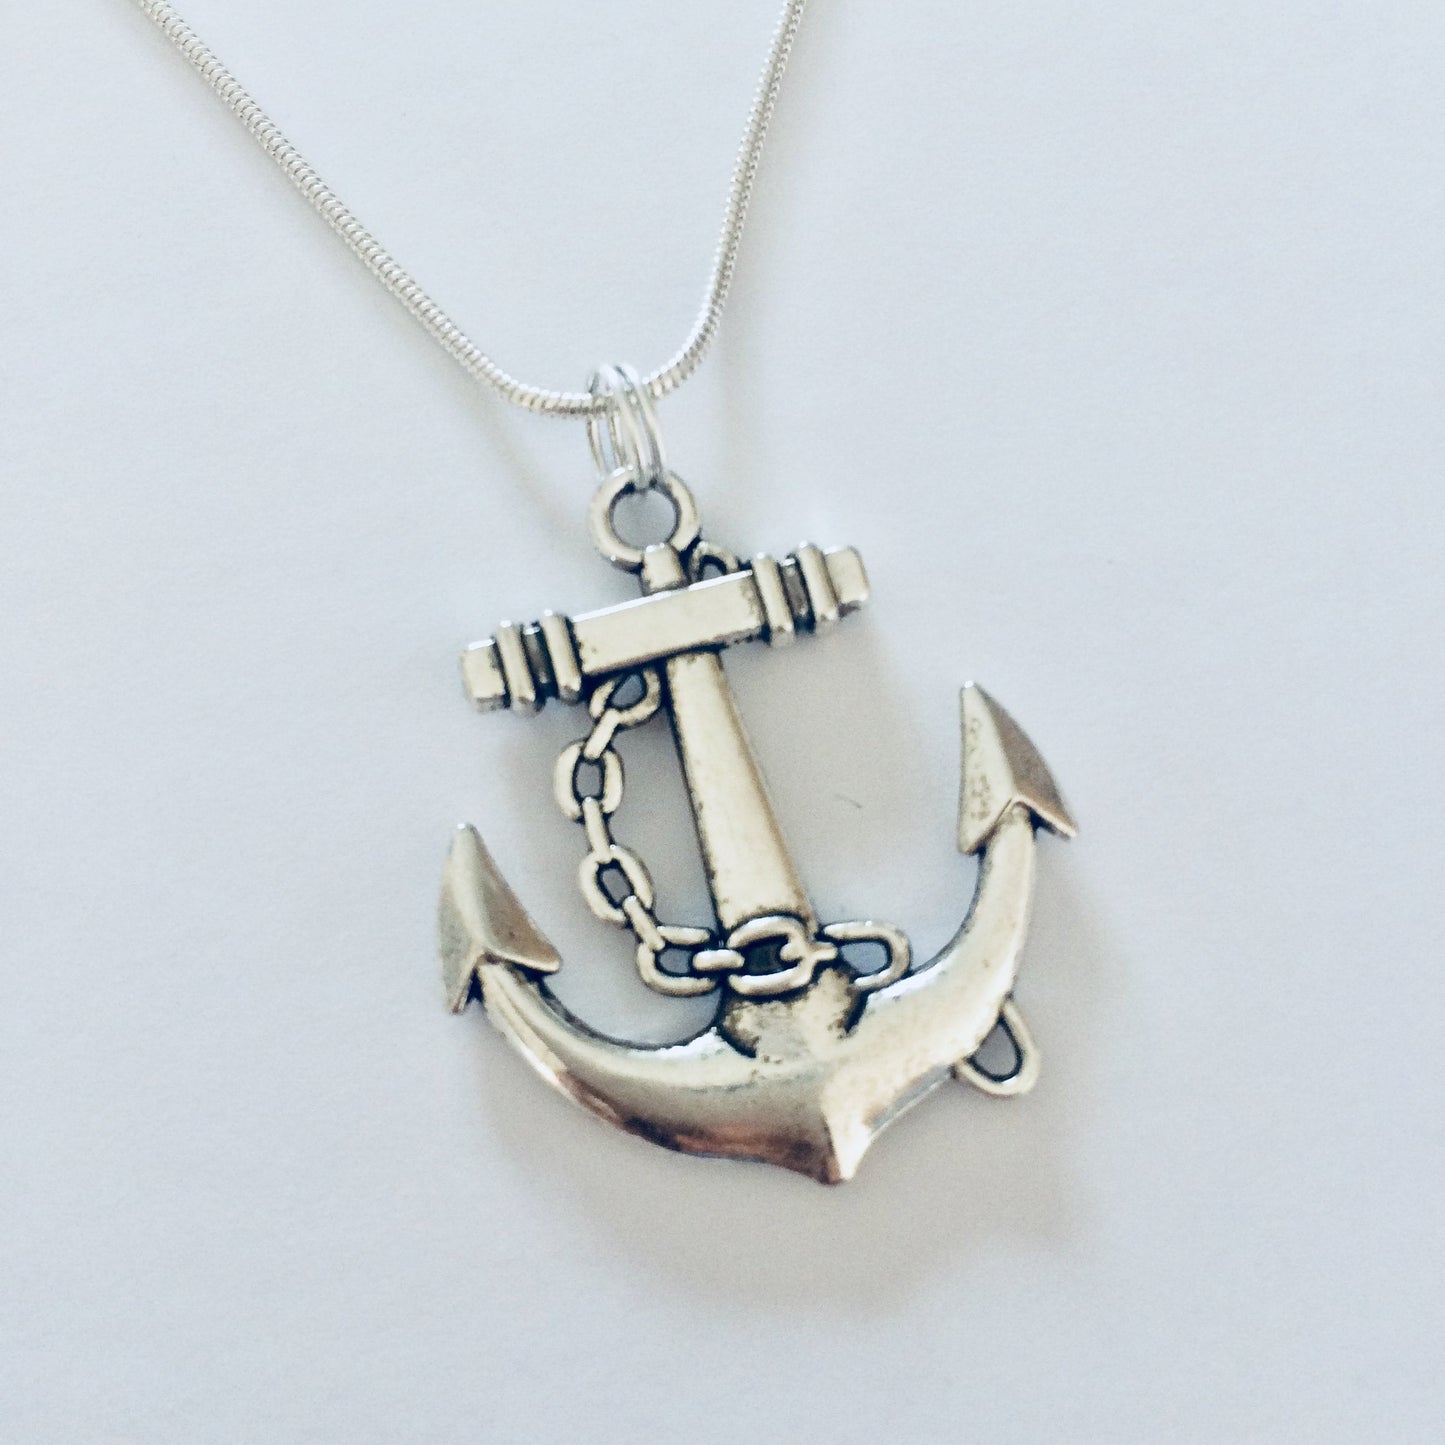 Anchor Necklace, Anchor Charm Necklace, Pirate Jewelry, Nautical Charm, Ship Pendant, Pirate Costume Jewellery, Sailor Oufit Jewellery.